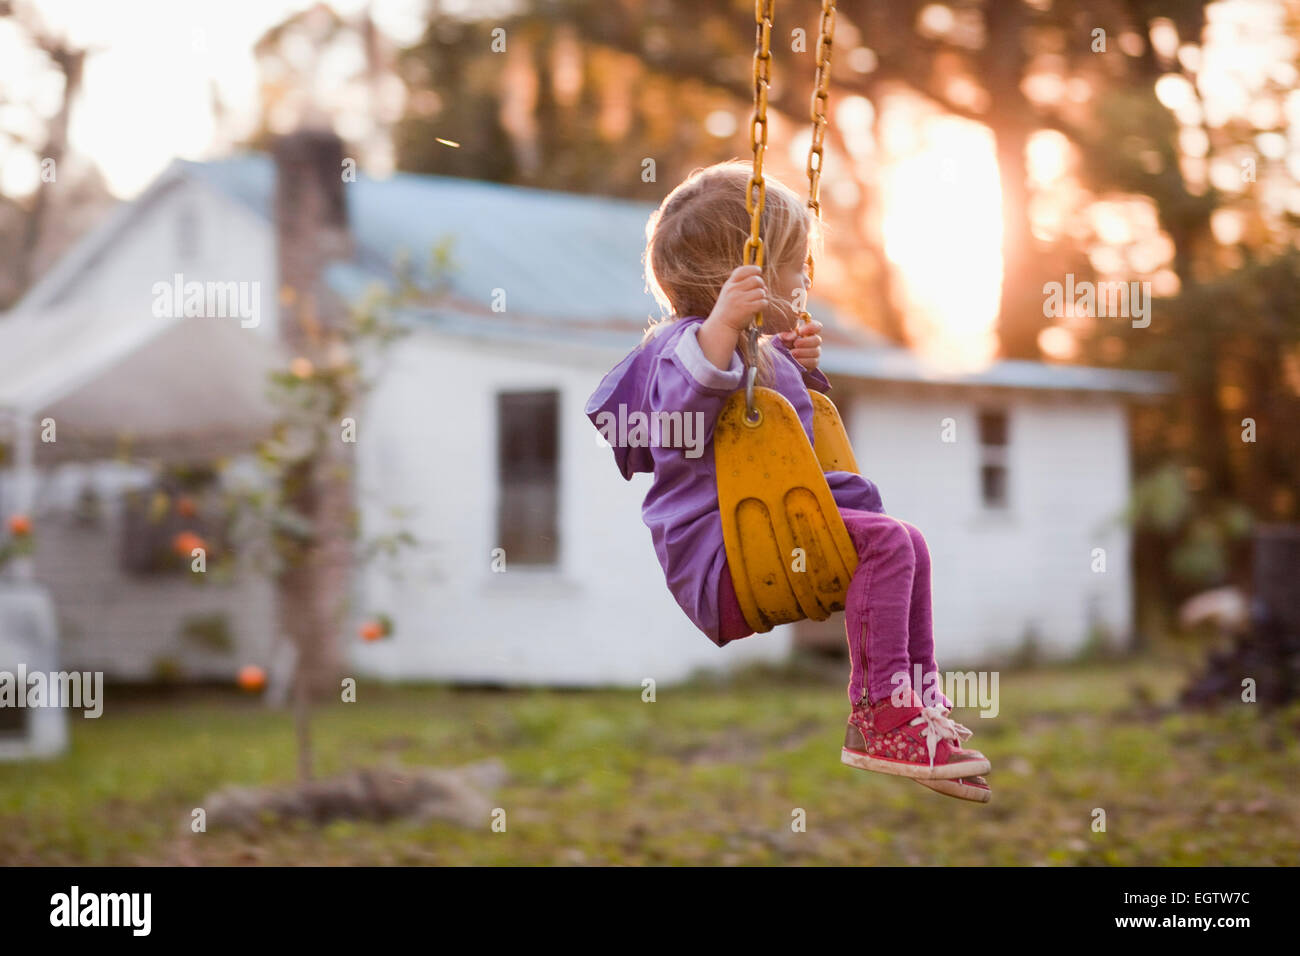 A young girl sits on a backyard swing. Stock Photo